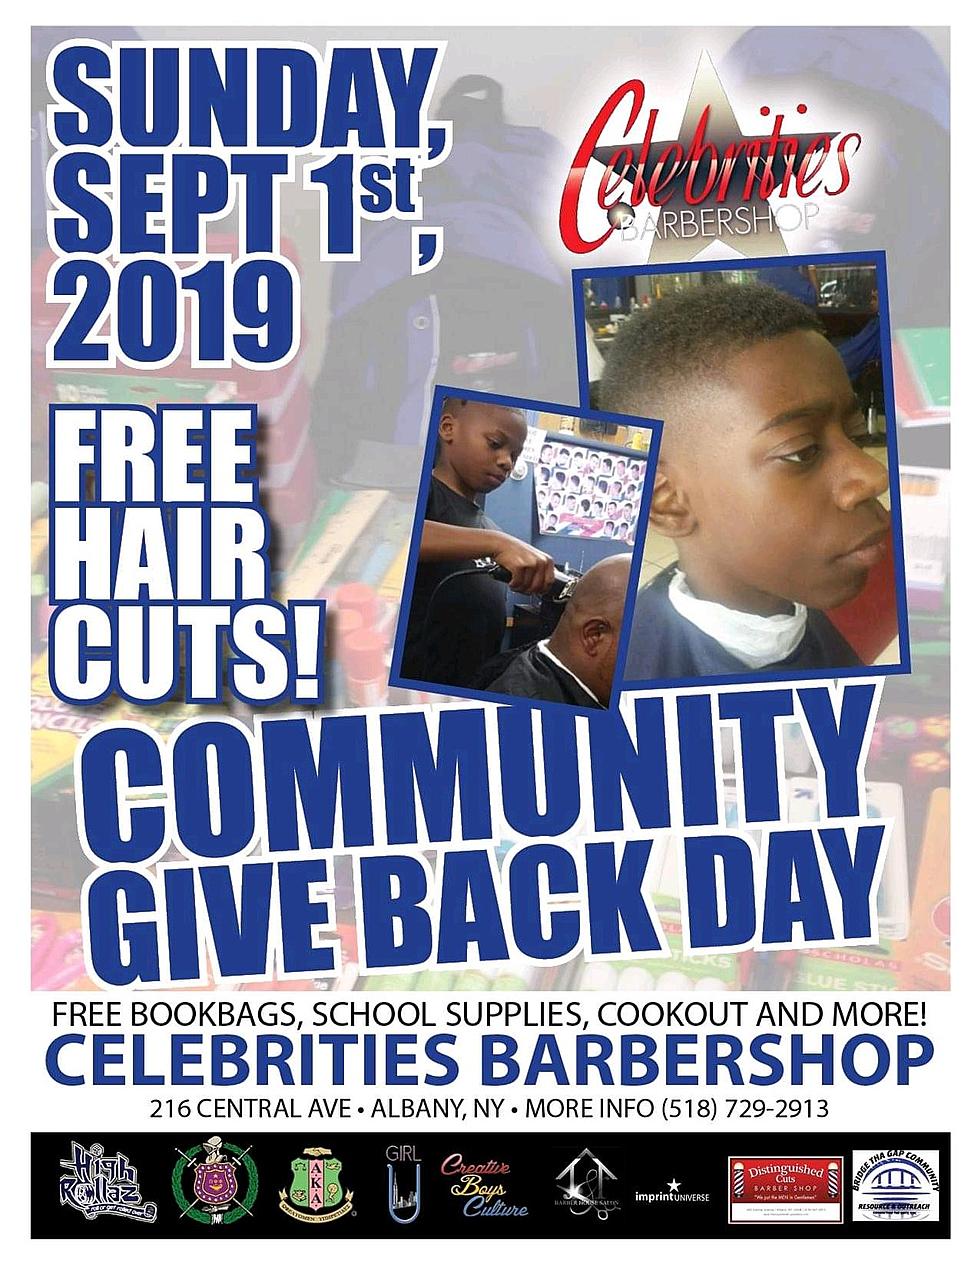 Celebrities Barber Shop Annual Free Haircuts and Book Bag Drive